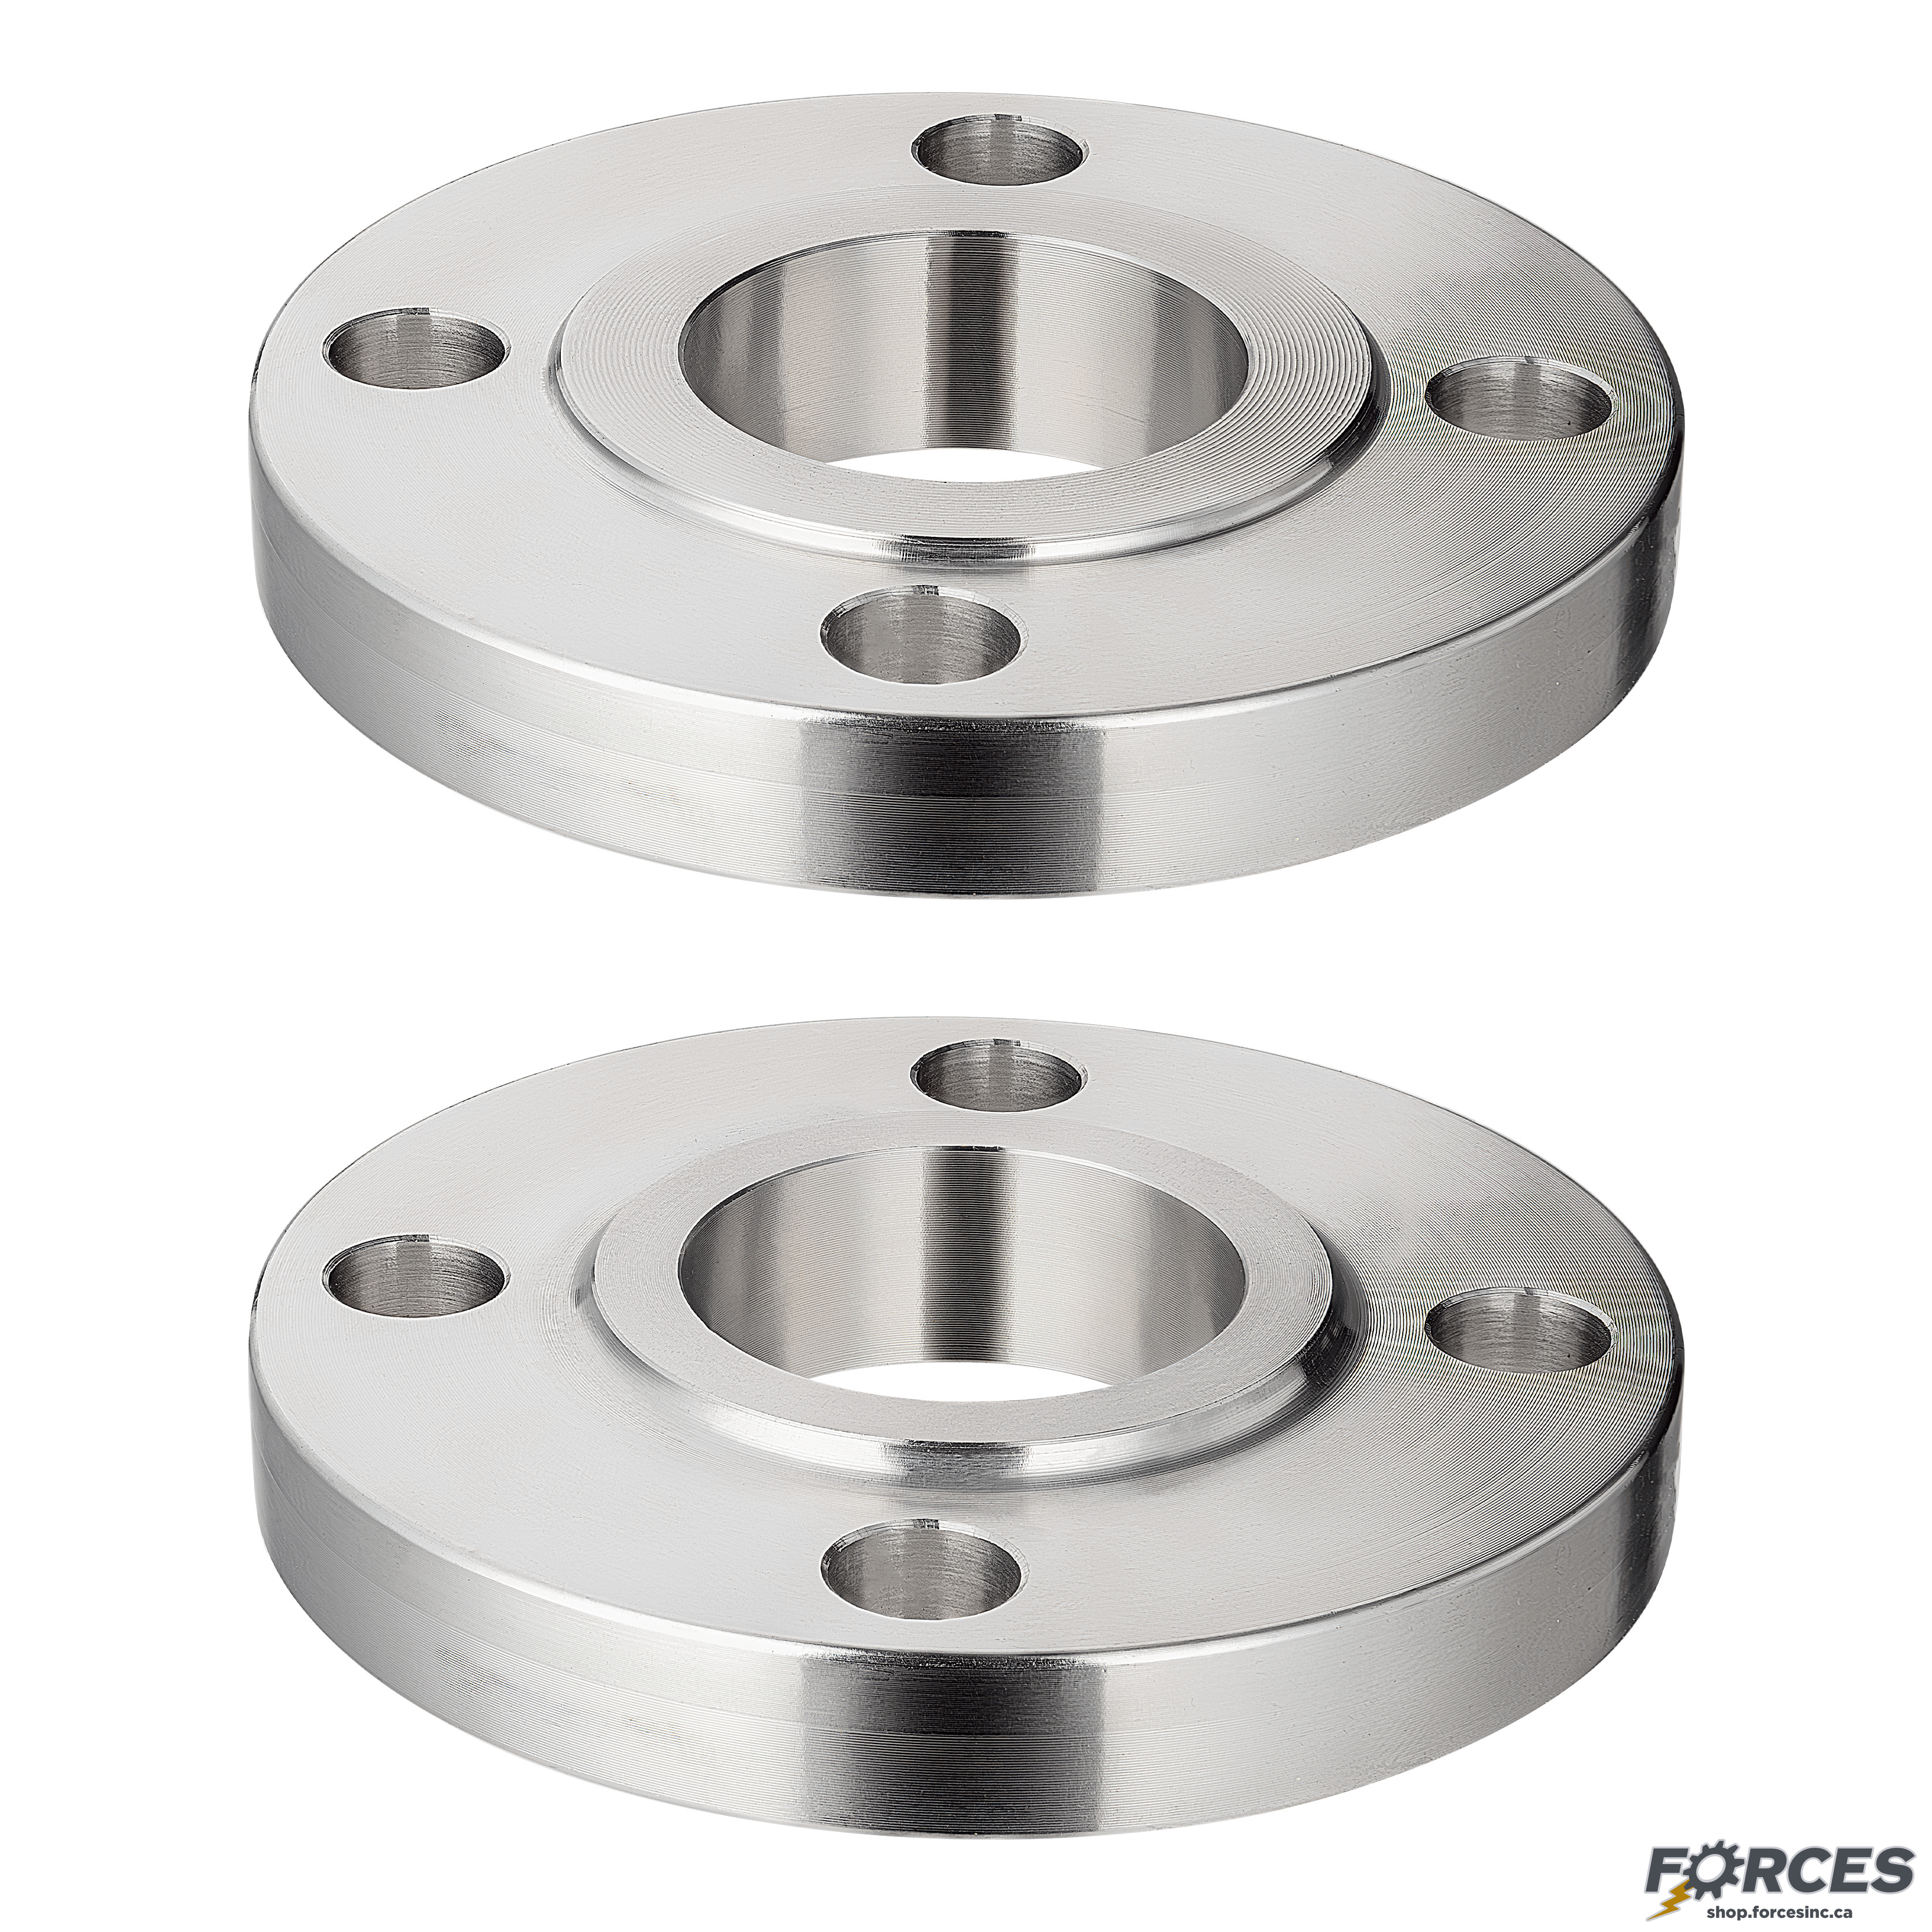 3/4" Slip-On Flange Class #150 - Stainless Steel 304 - Forces Inc